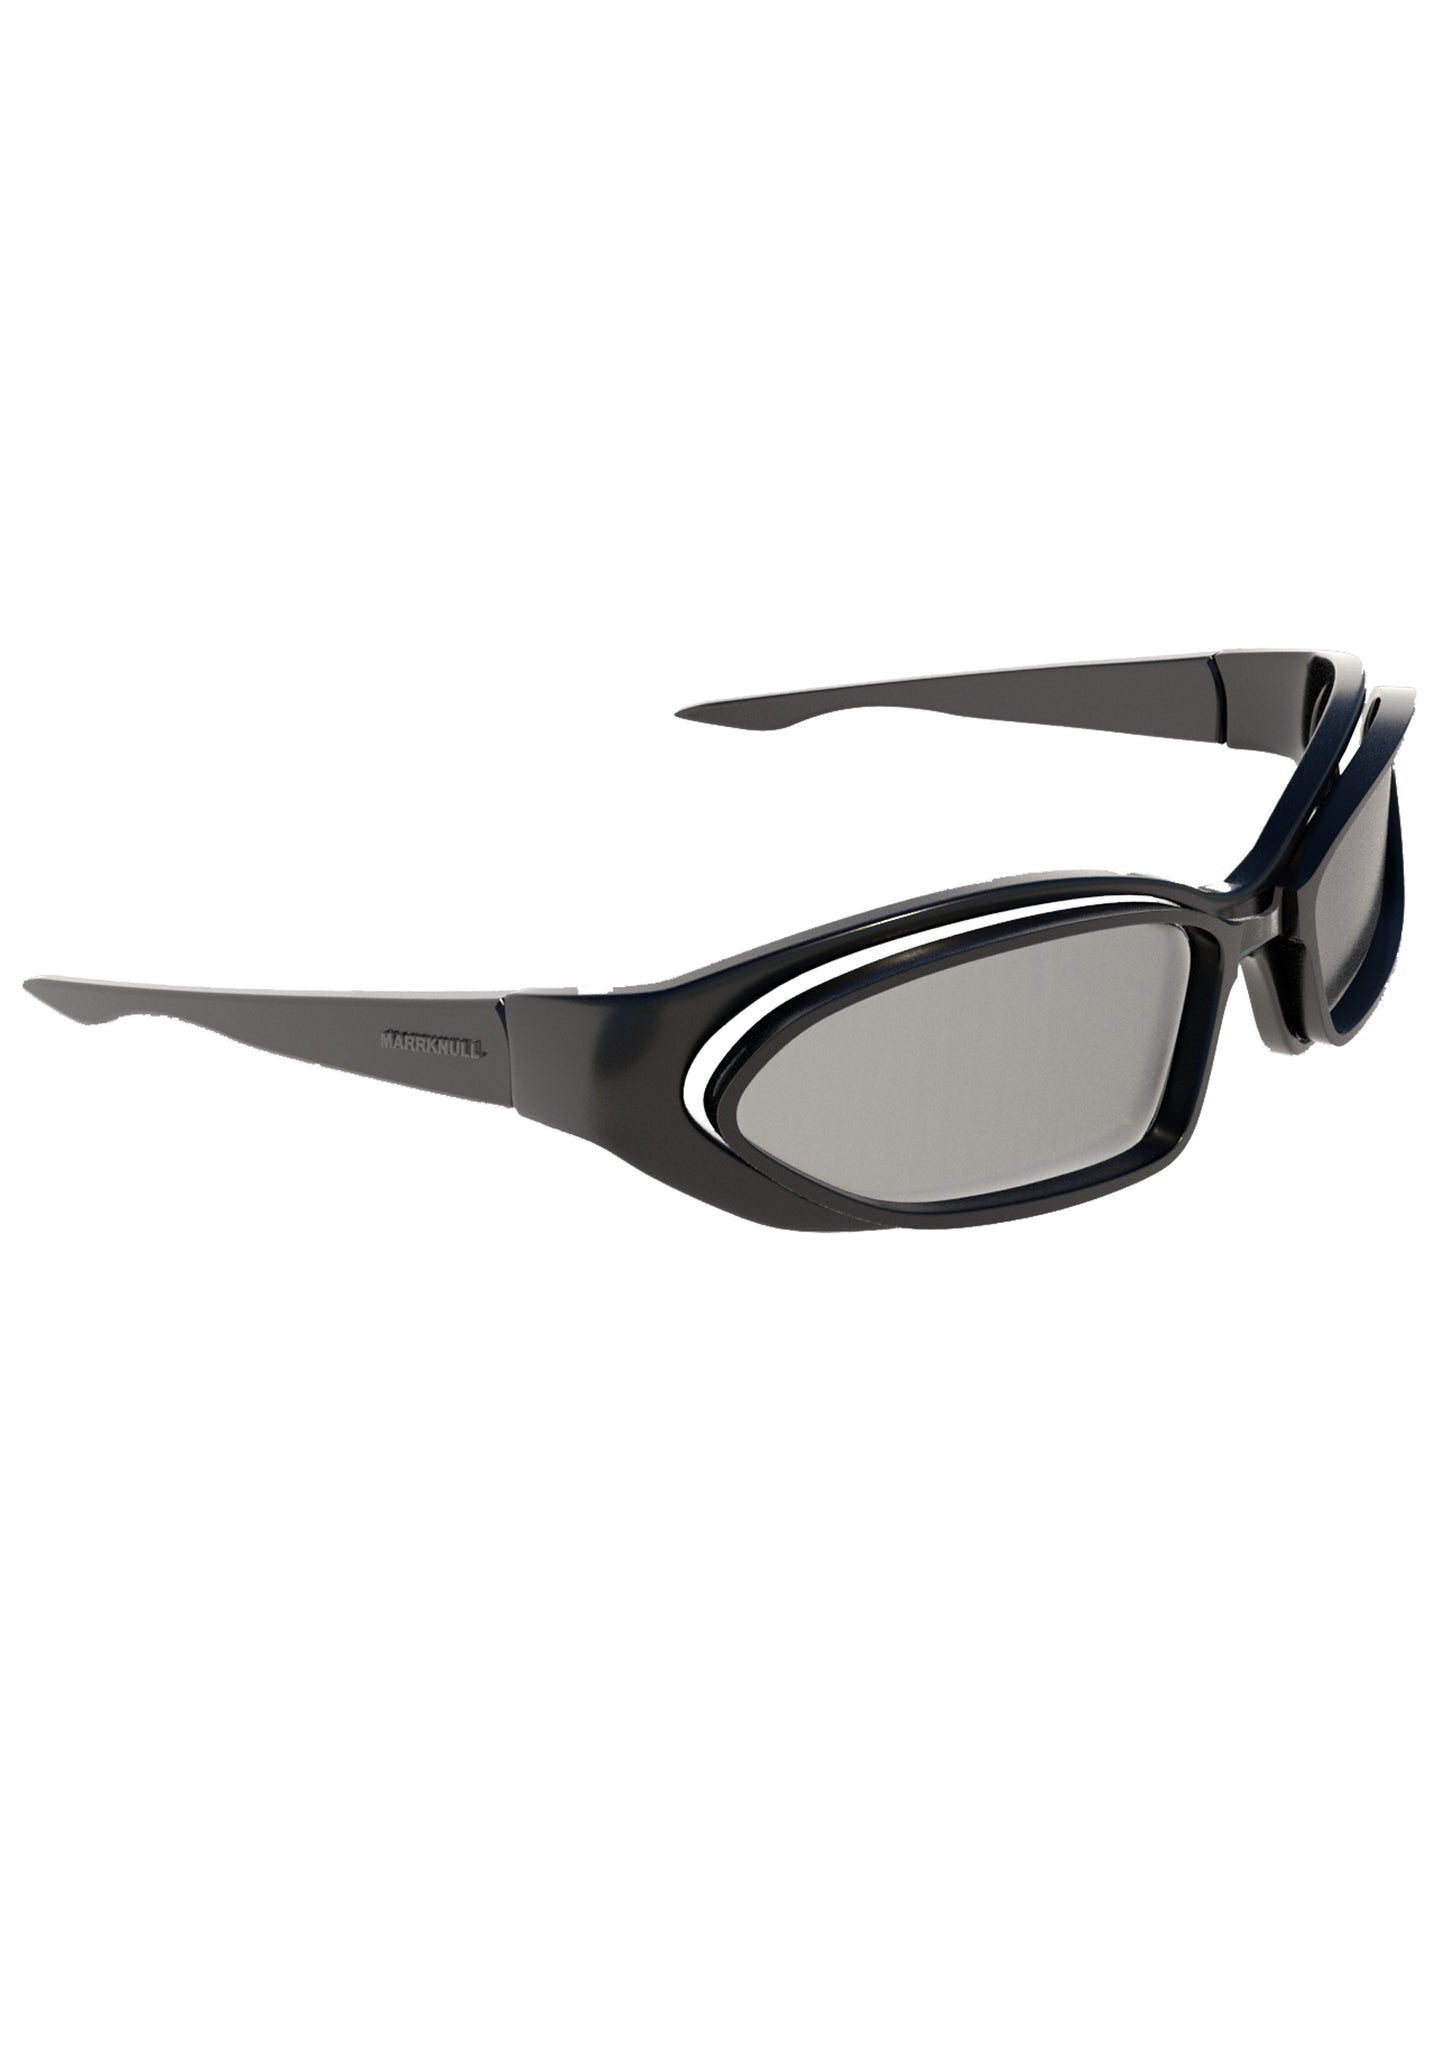 SOFT PEOPLE AREA JOINTLY-DESIGNED DOUBLE RIM SUNGLASSES BLACK